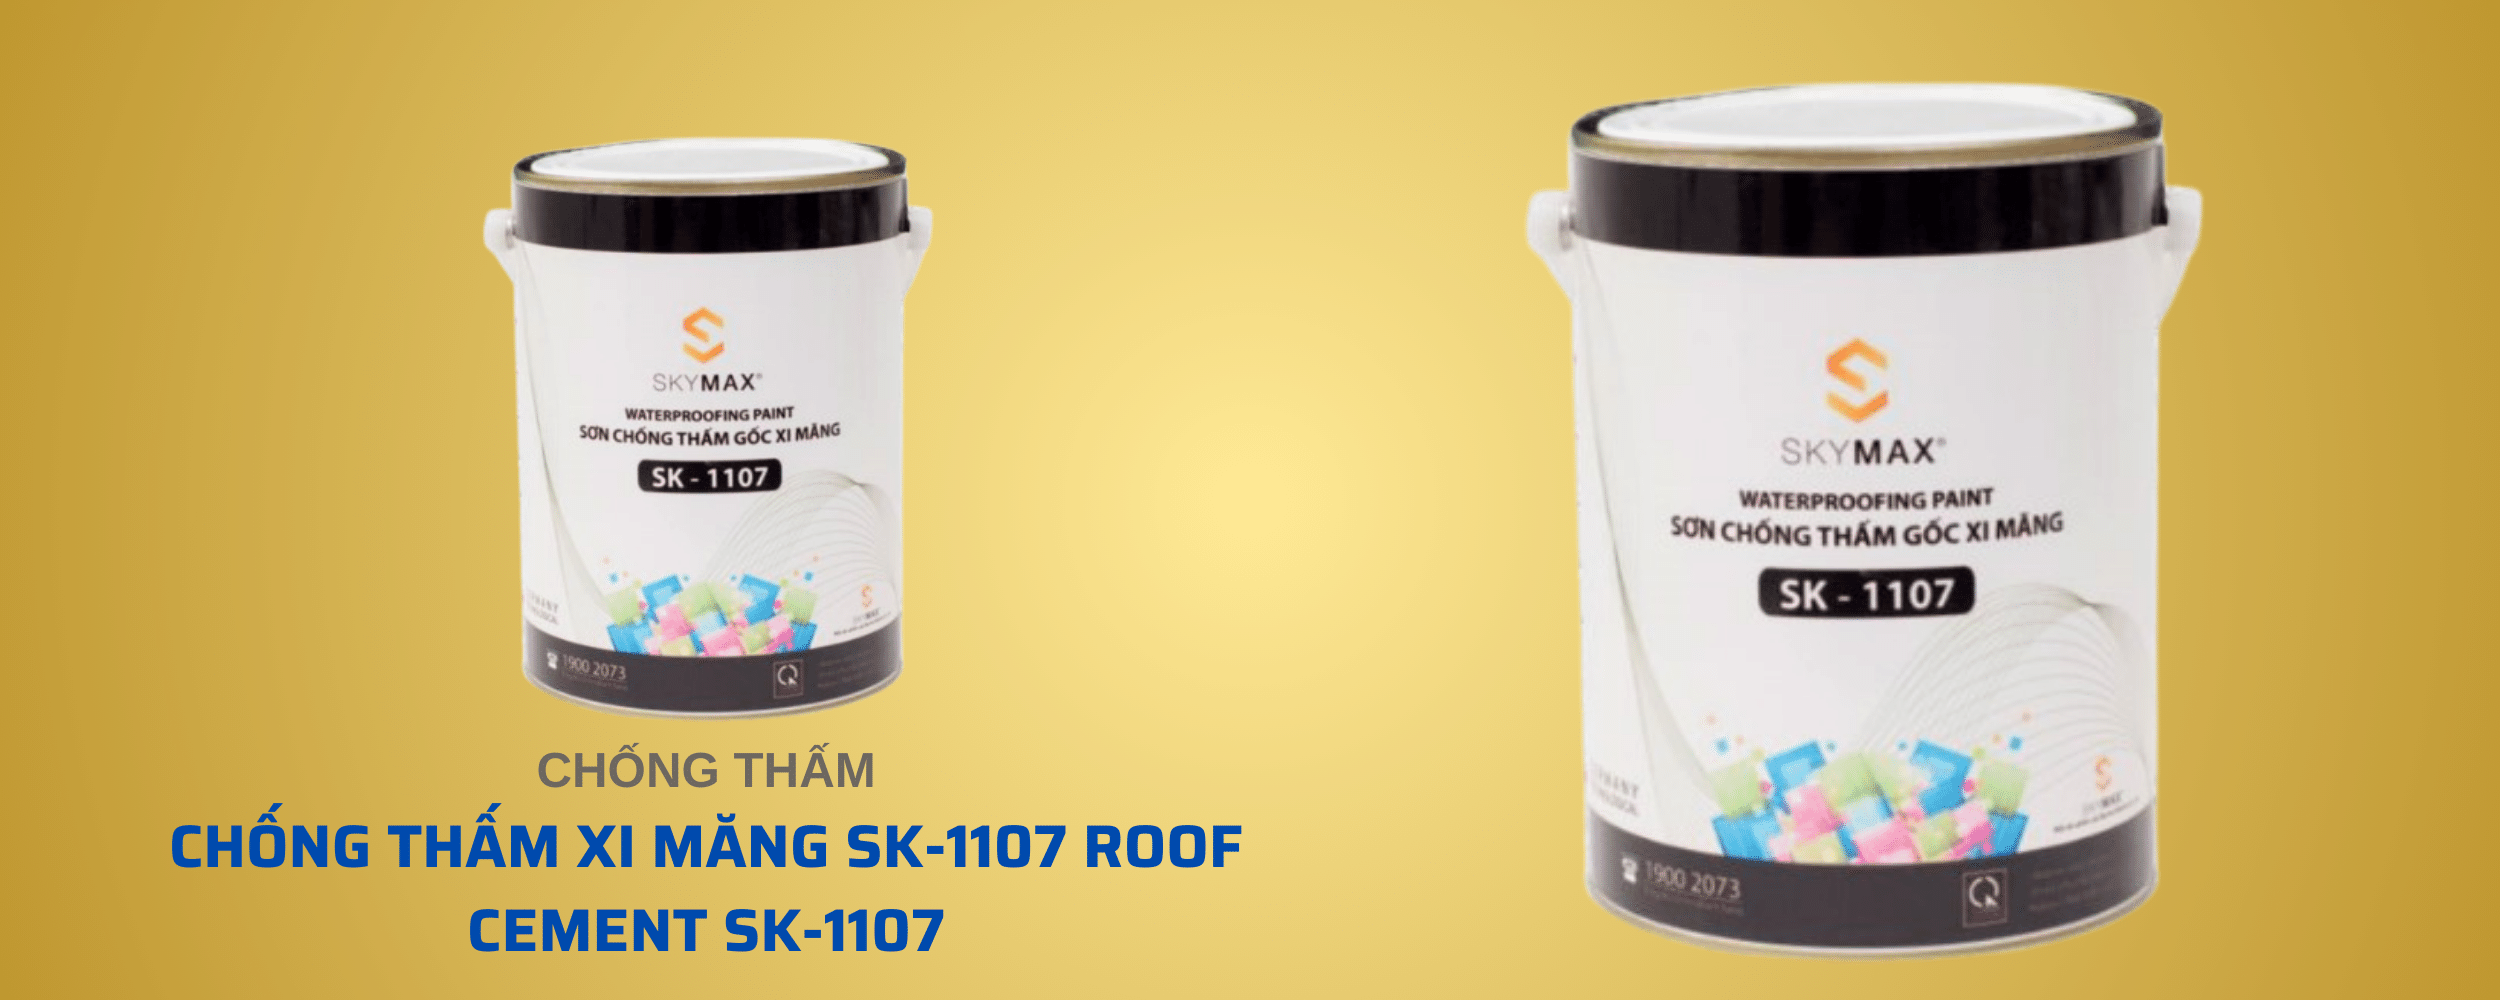 CHỐNG THẤM XI MĂNG SK-1107 ROOF CEMENT SK-1107-3748-1